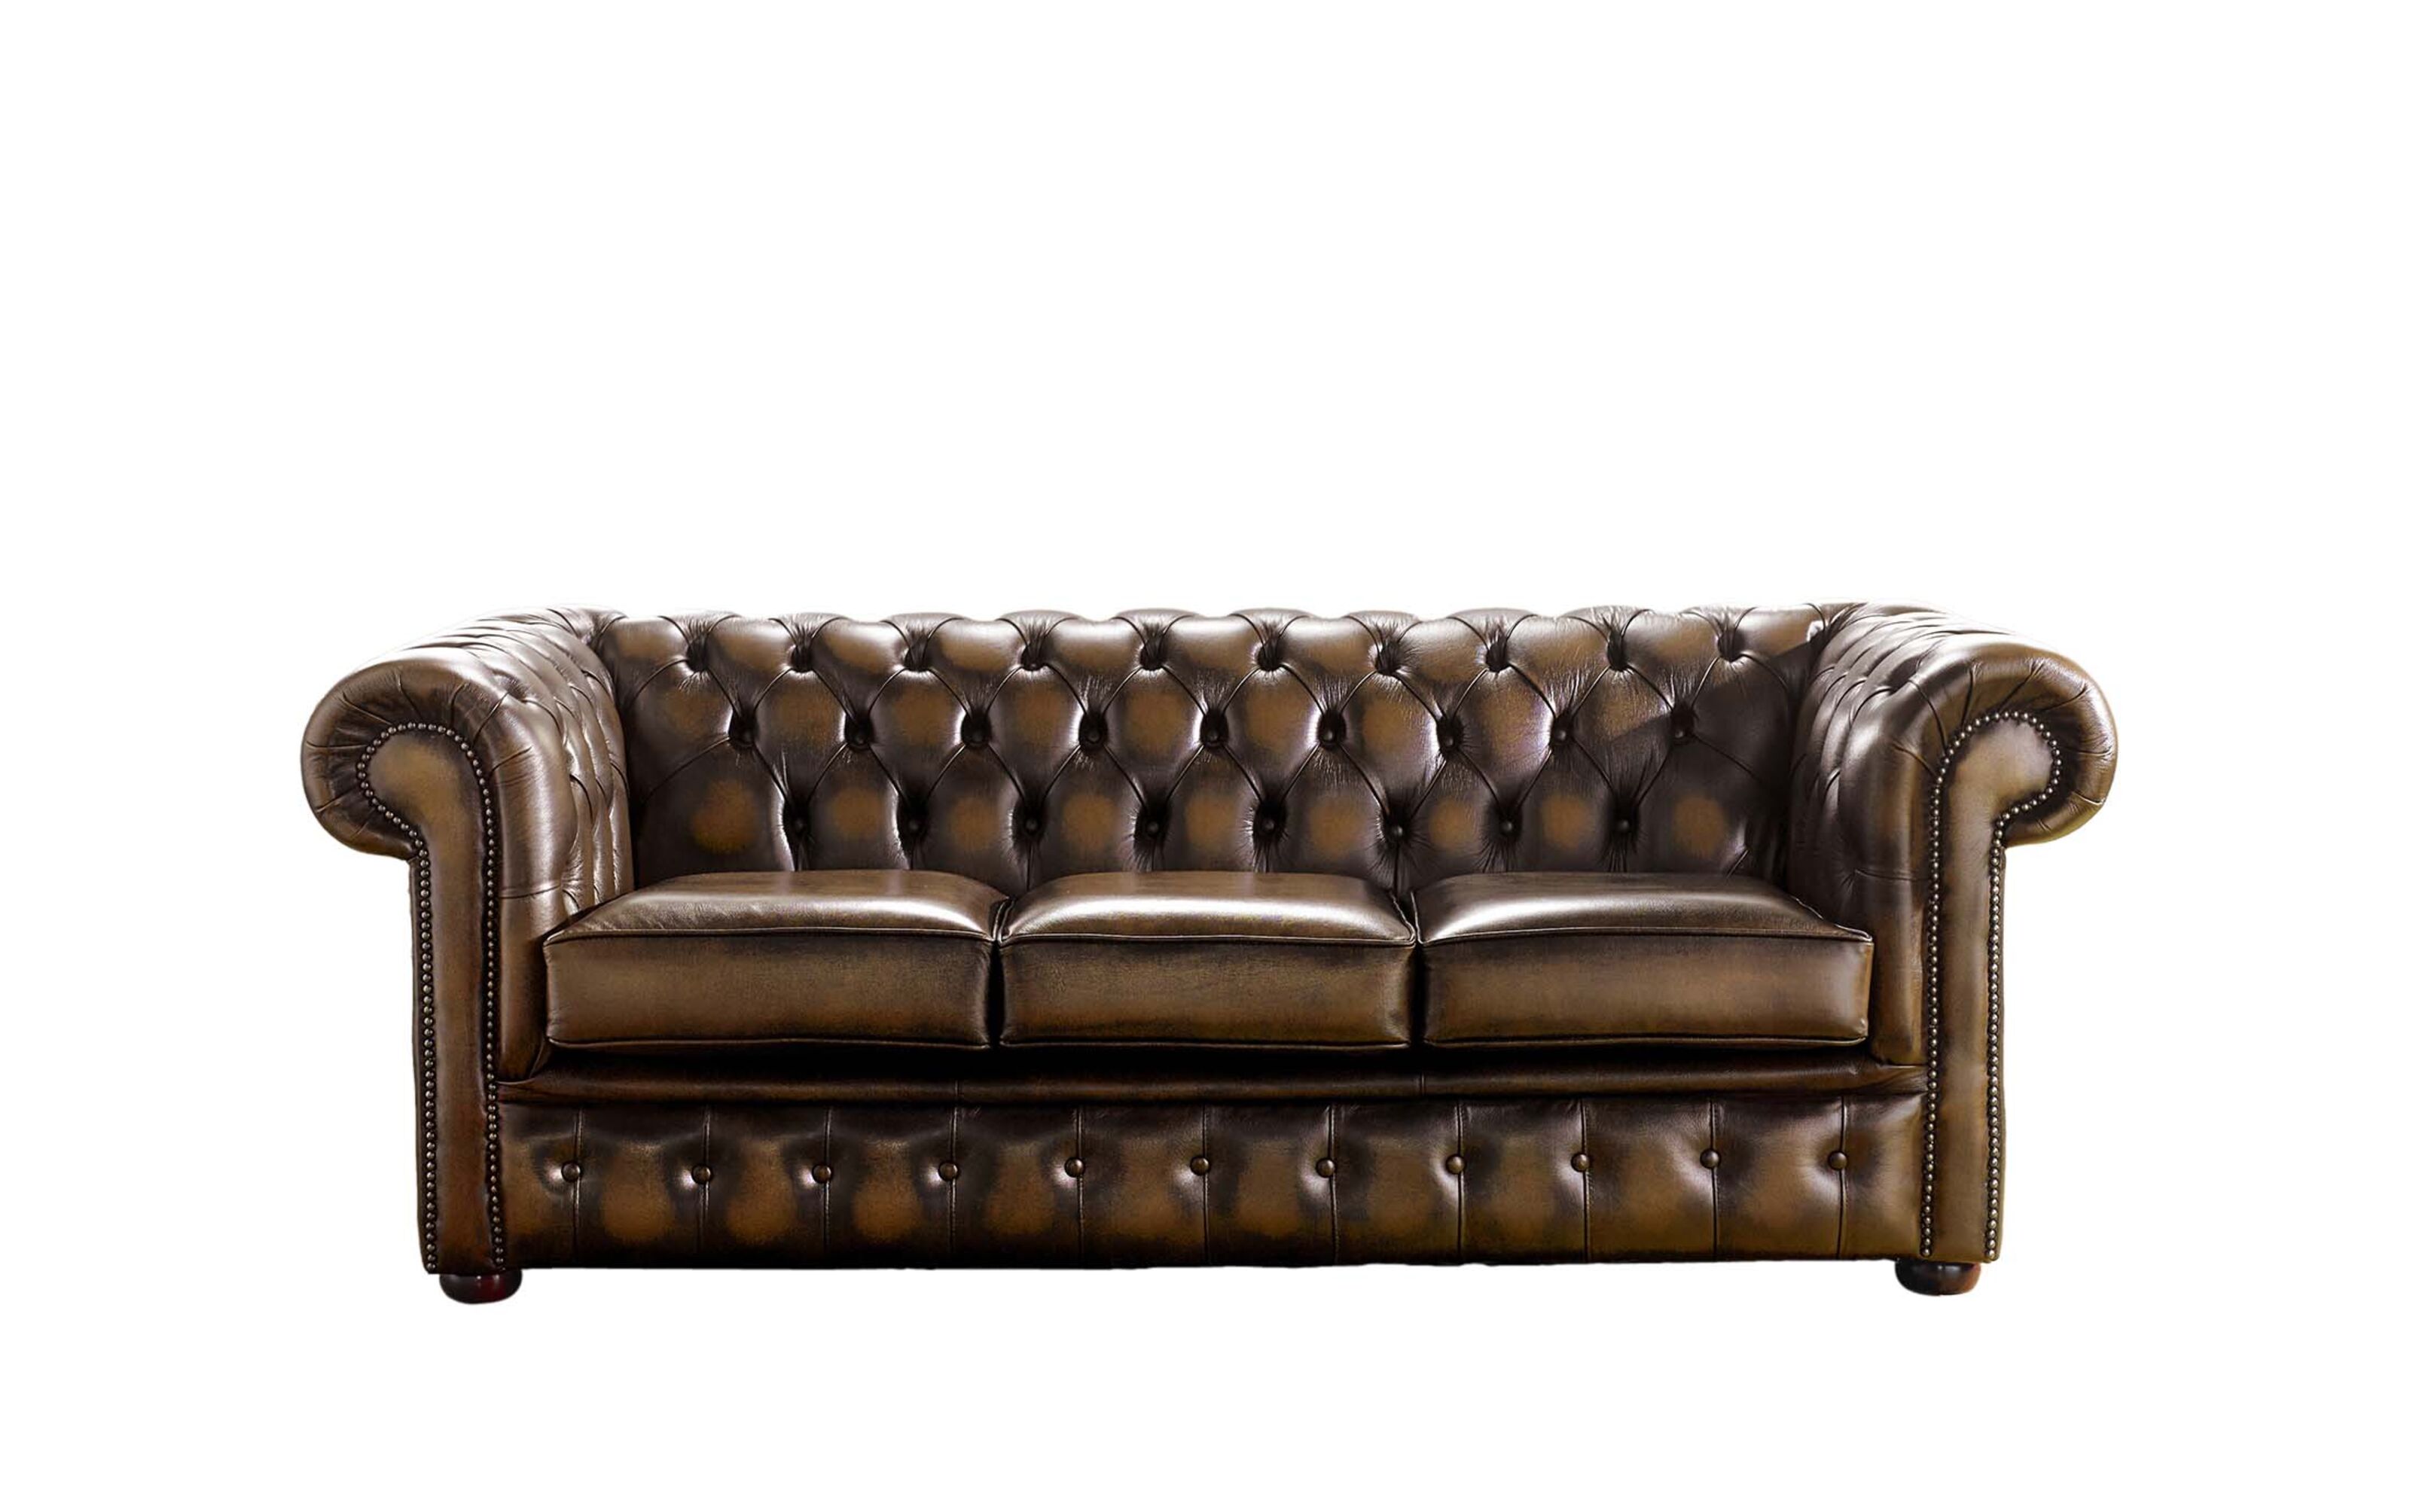 Refined Comfort Chesterfield Sofas for French Interiors  %Post Title